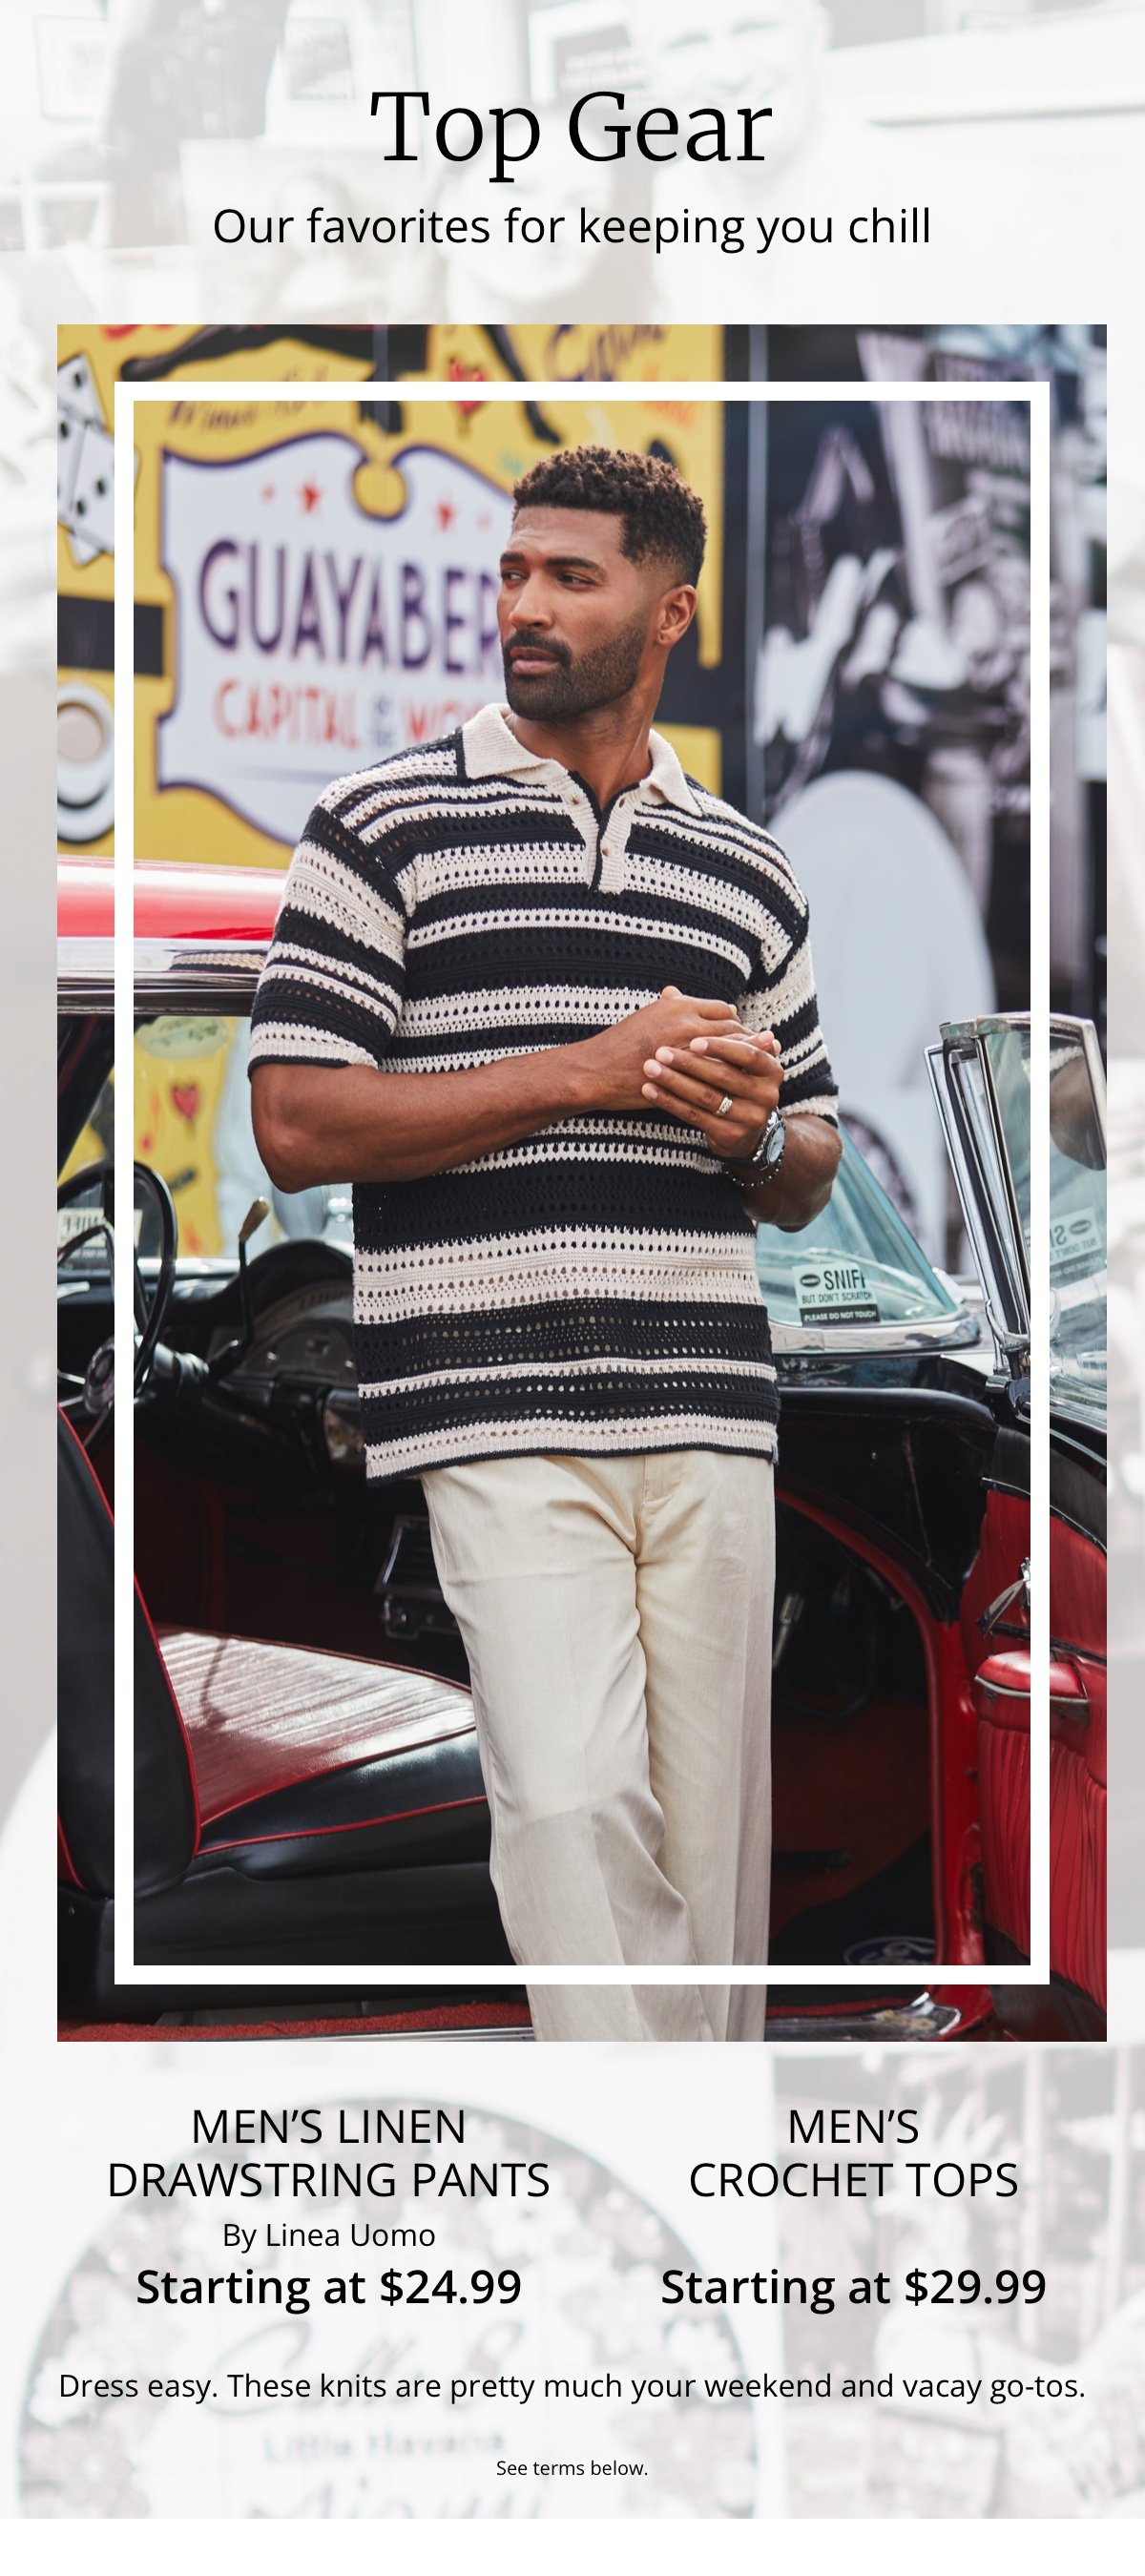 Top Gear|Our favorites for keeping you chill|Men’s Linen Drawstring Pants|By Linea Uomo|Starting at \\$24.99|Men’s Crochet Tops|Starting at \\$29.99|Dress easy. These knits are pretty much your weekend and vacay go-tos.|See terms below.